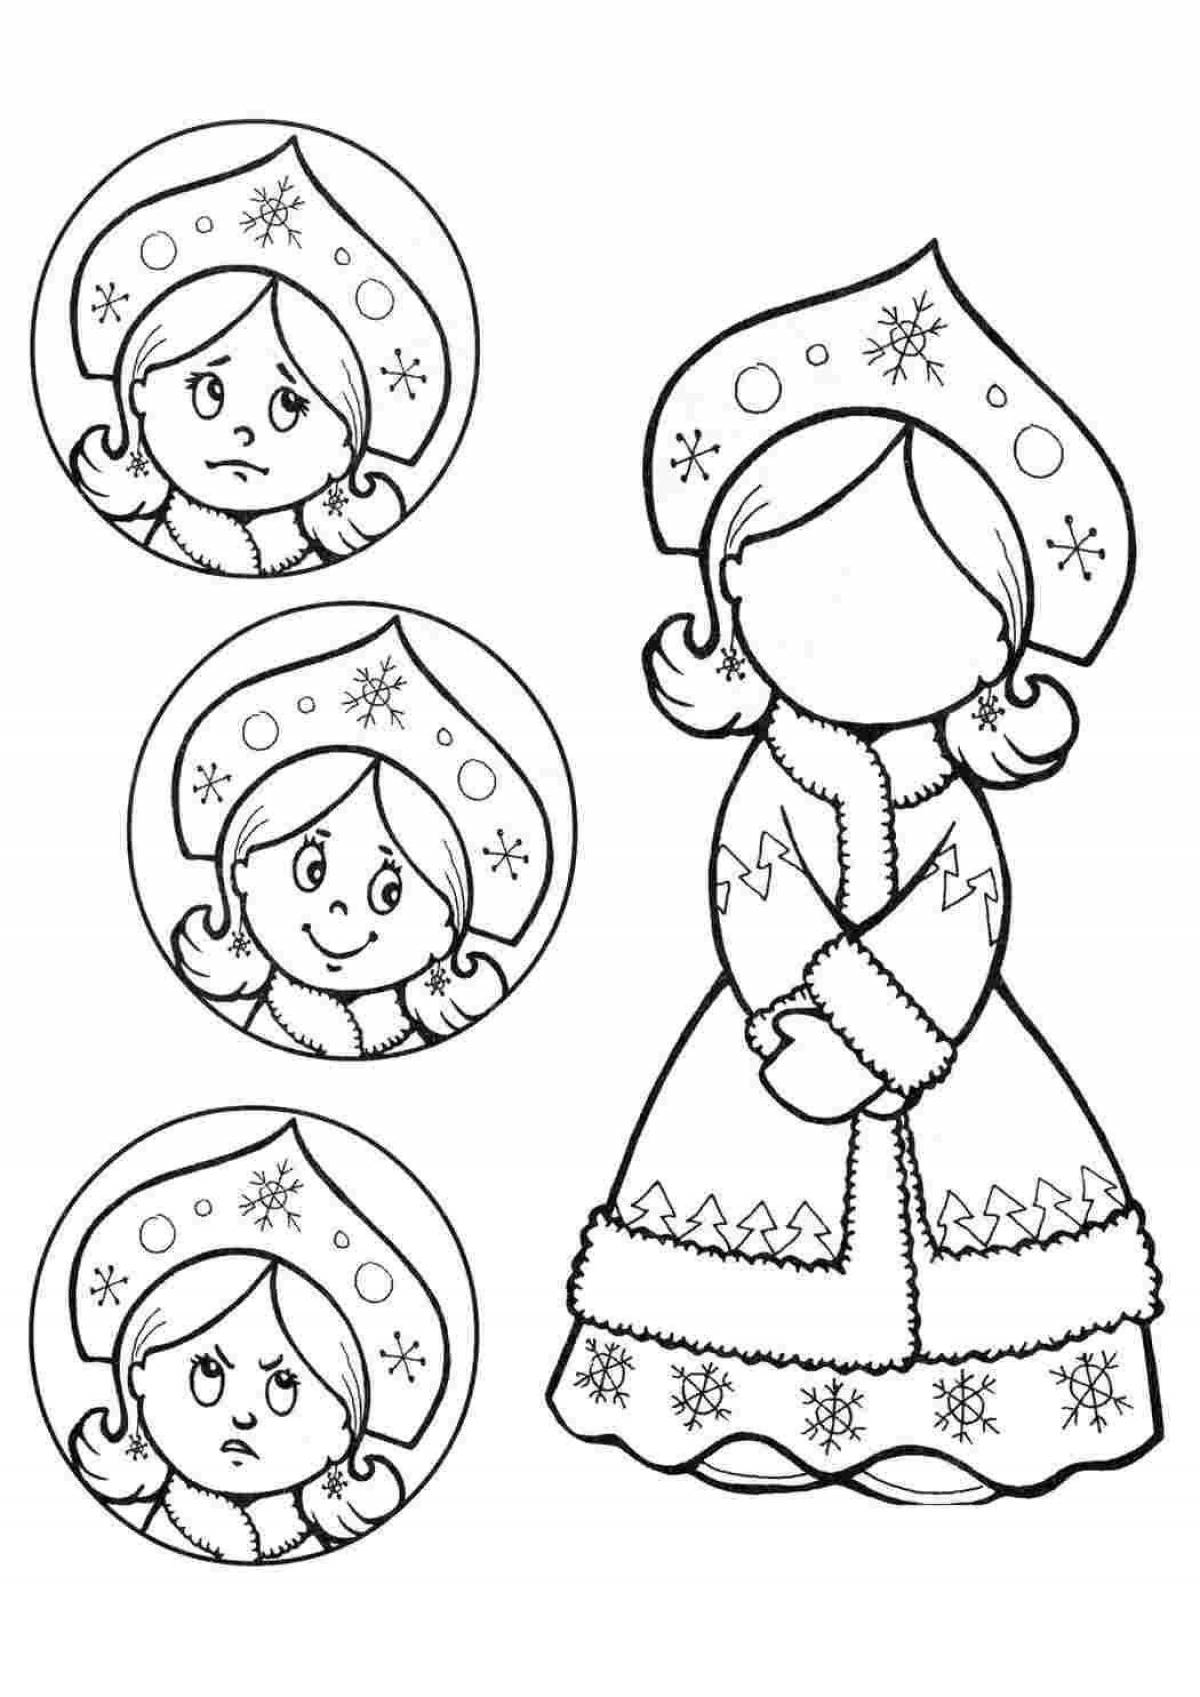 Coloring cute face of snow maiden